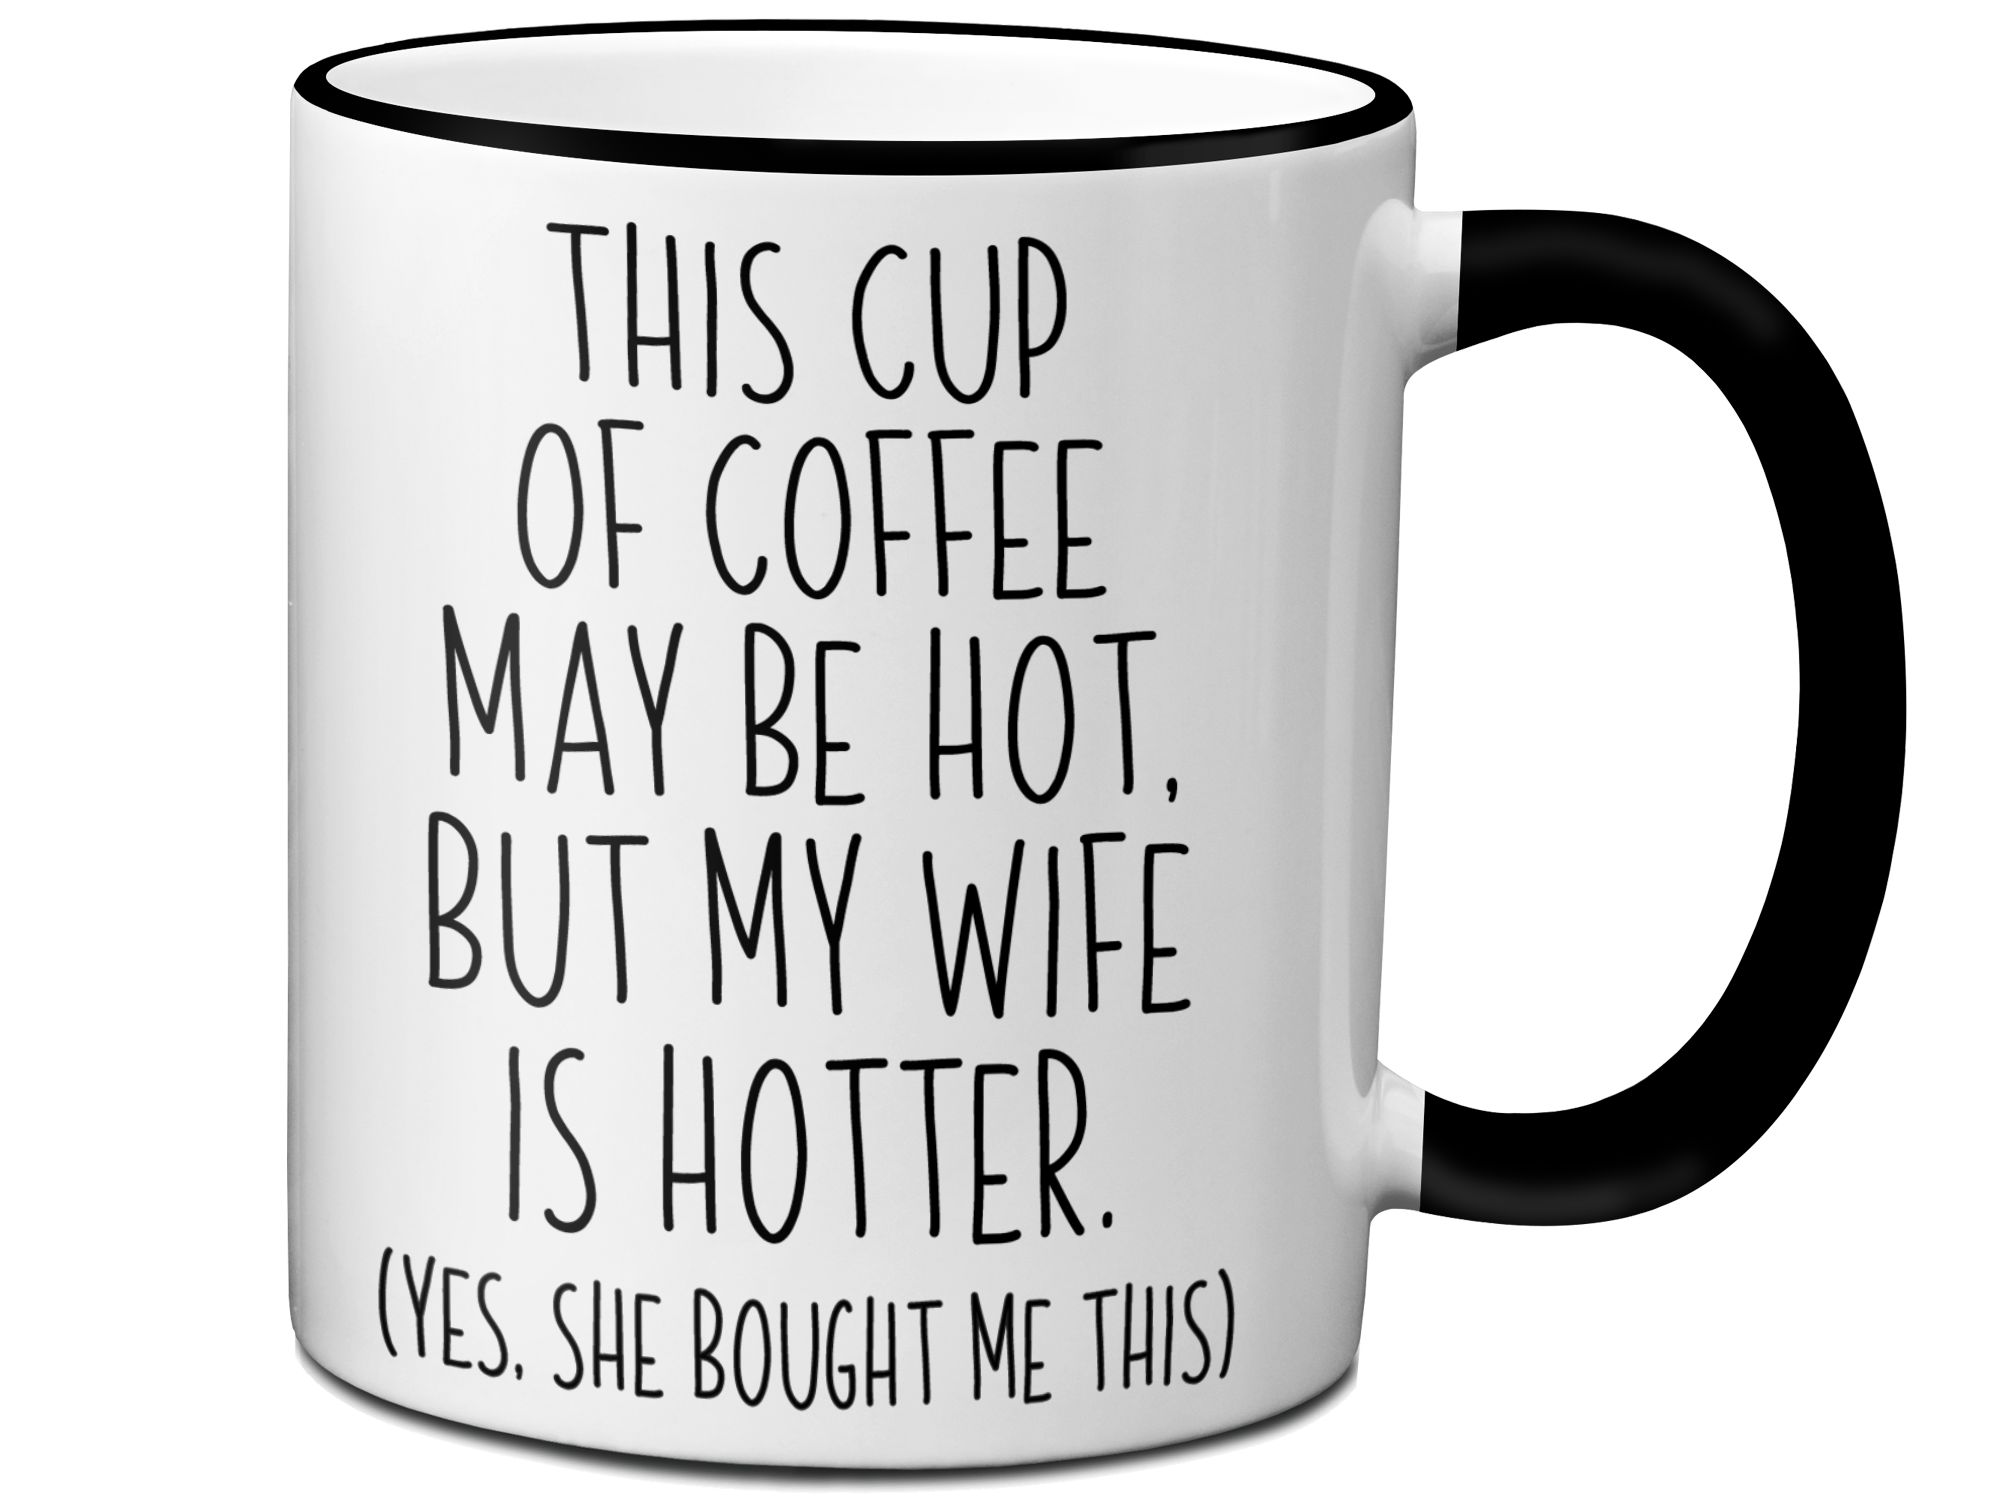 Funny Wife Gifts - This Cup of Coffee May Be Hot but My Wife is Hotter Coffee Mug